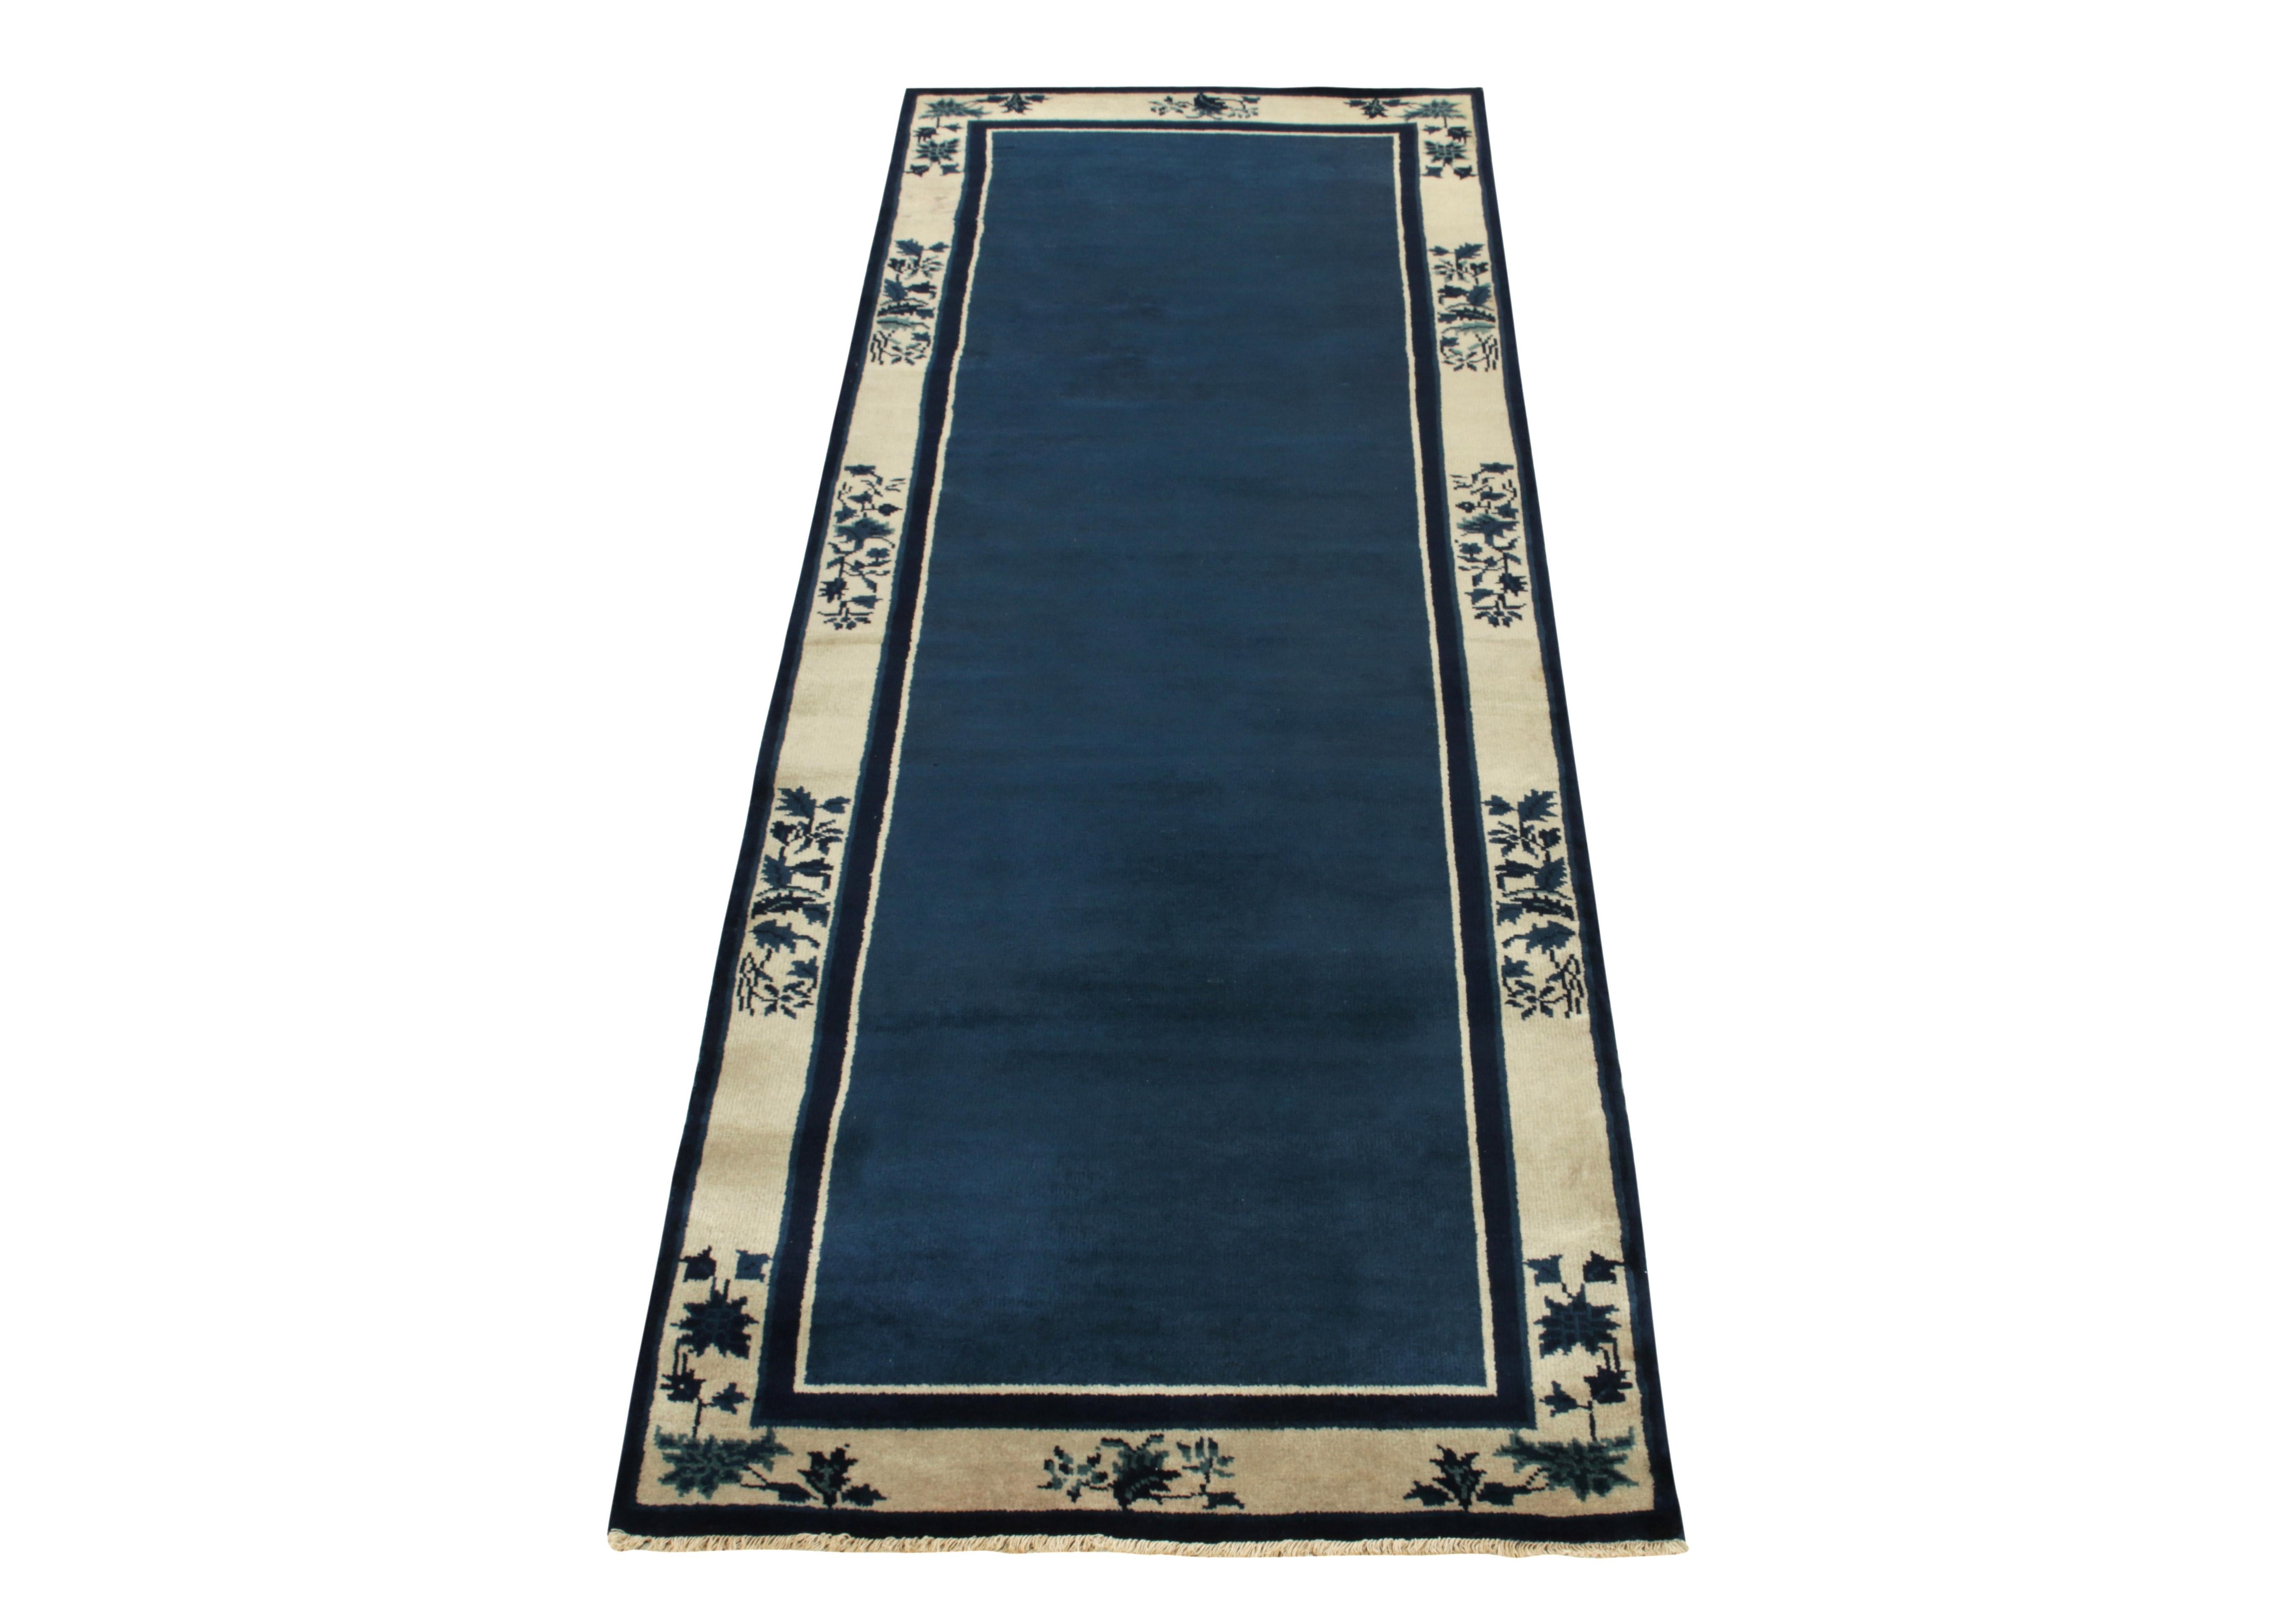 A 3x12 hand-knotted wool vintage runner connoting Chinese art deco sensibilities of the 1920s, coming from Rug & Kilim’s Antique & Vintage collection. The clean blue open field enjoys light dark spots for an interesting visual appeal on scale